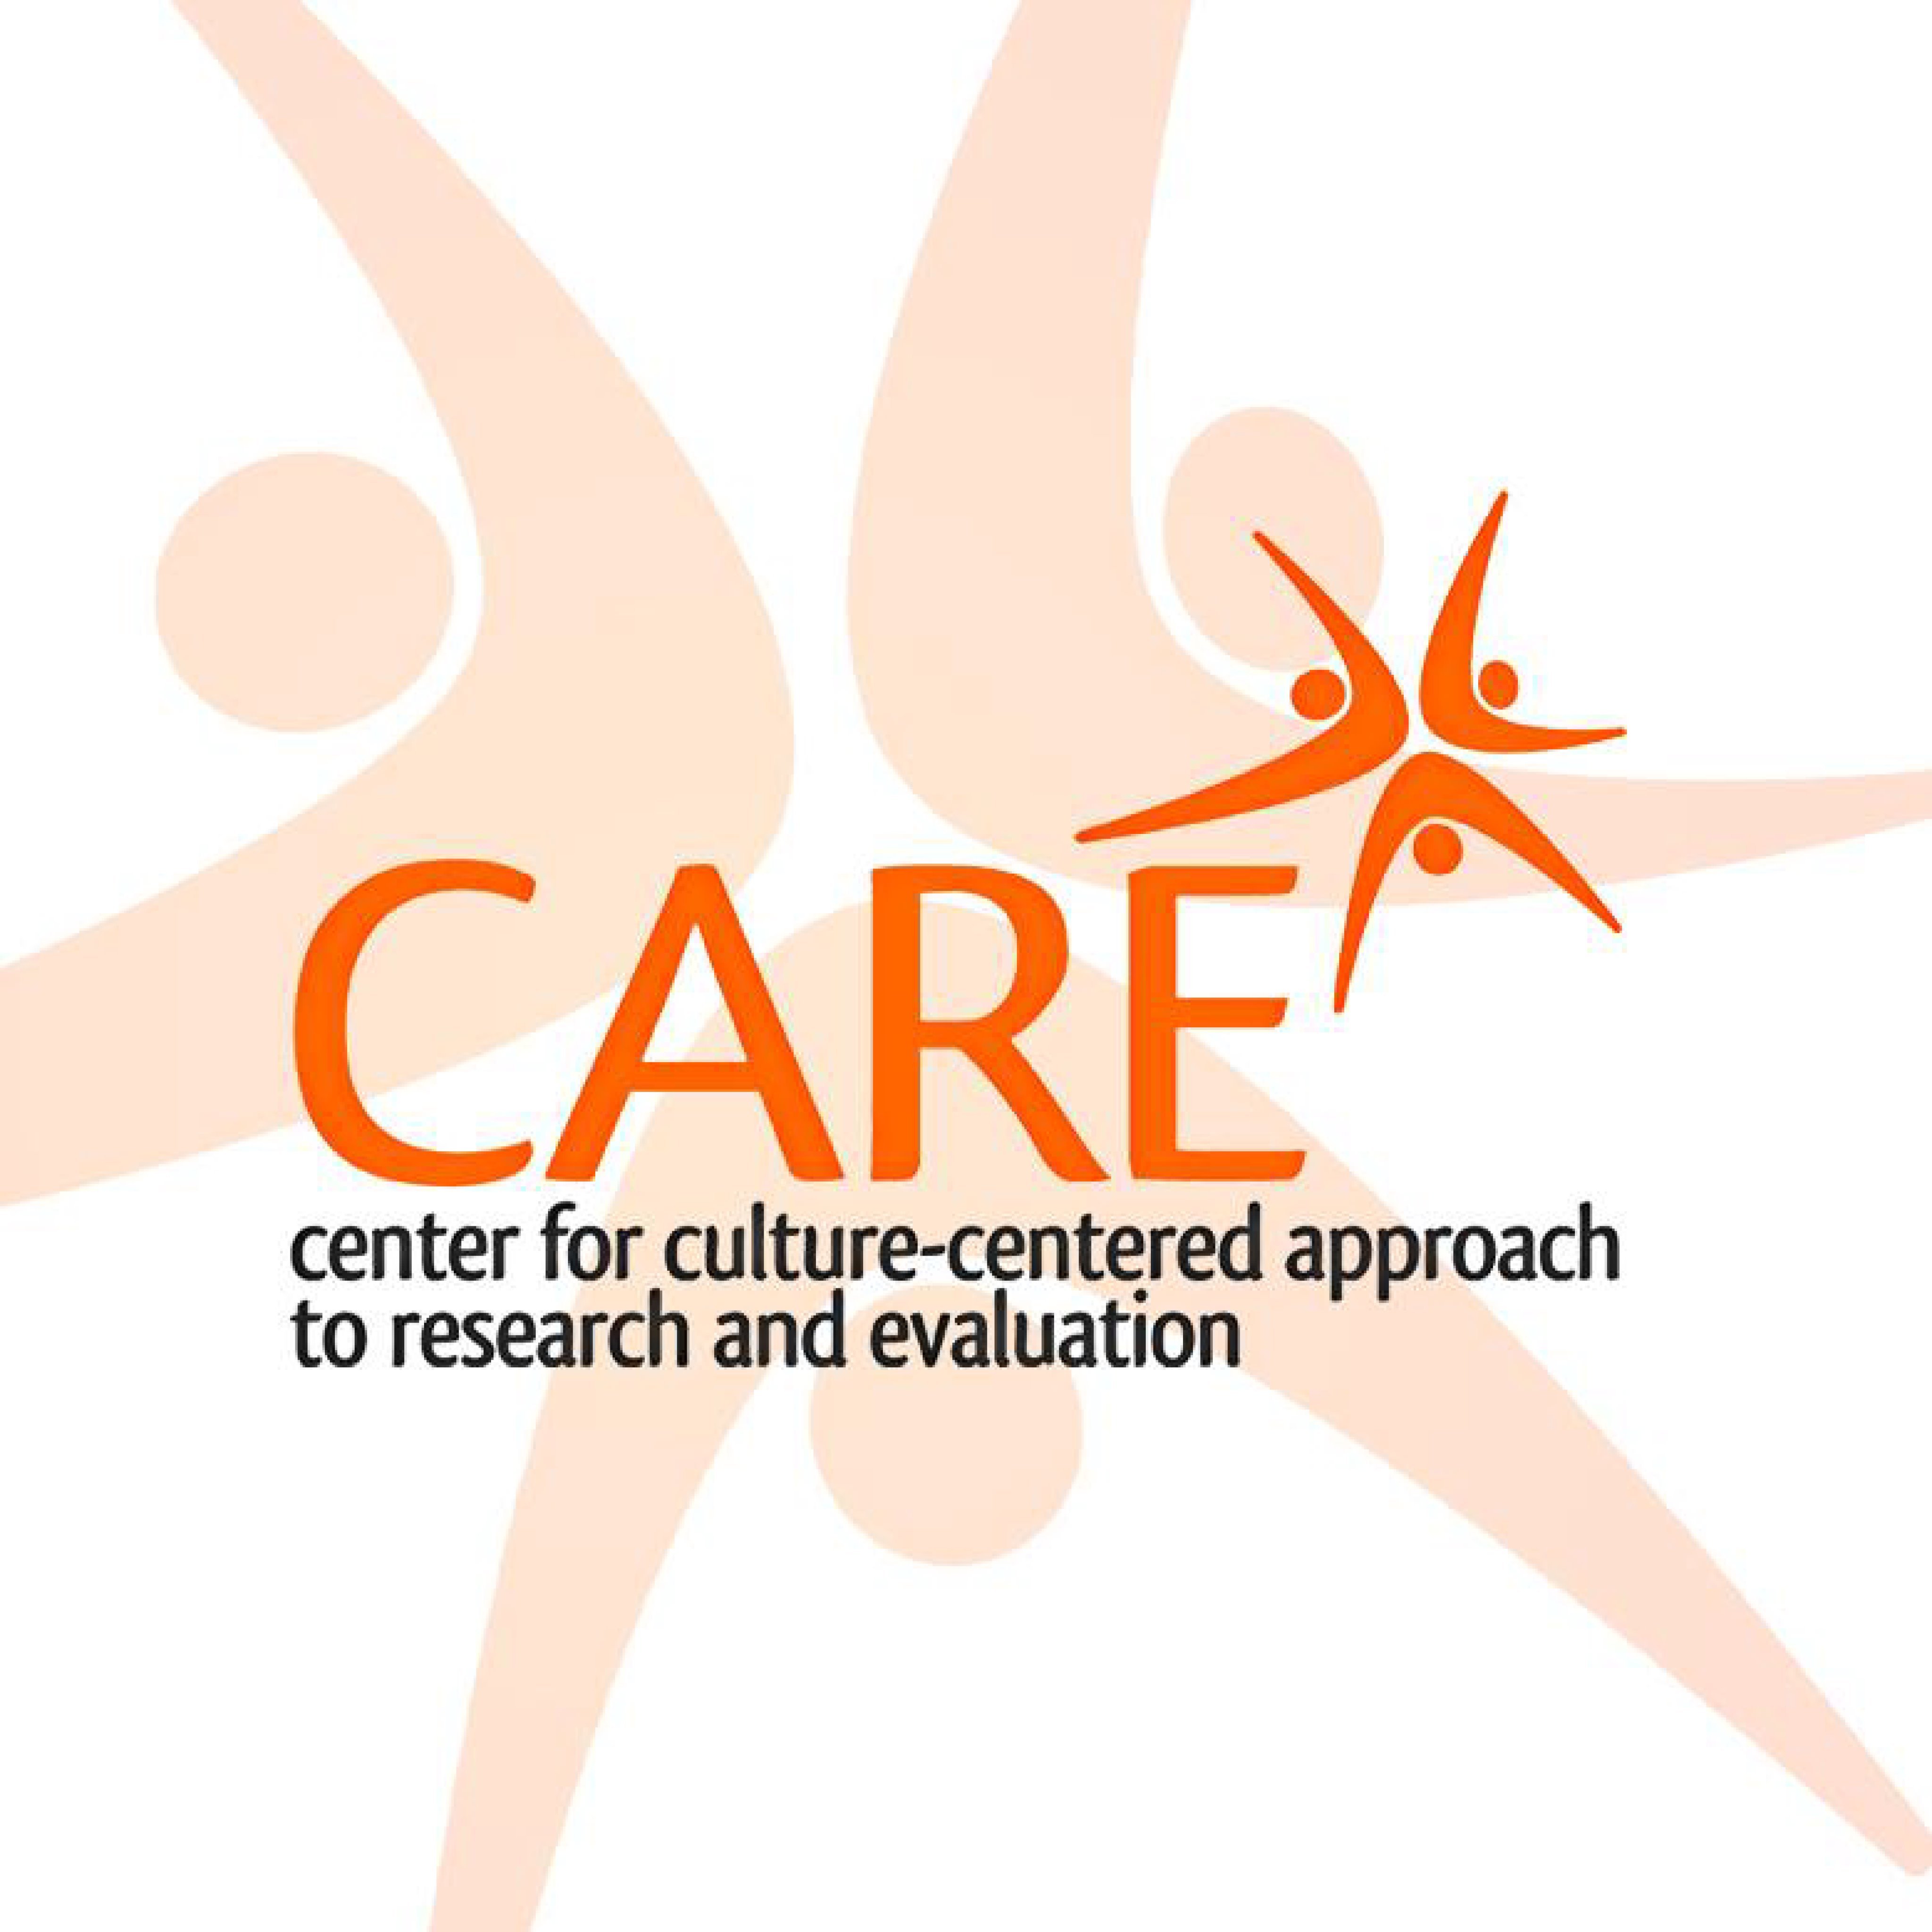 CARE is a research center at Massey University which uses participatory & culture-centered methodologies to develop community-driven com­munication solutions.